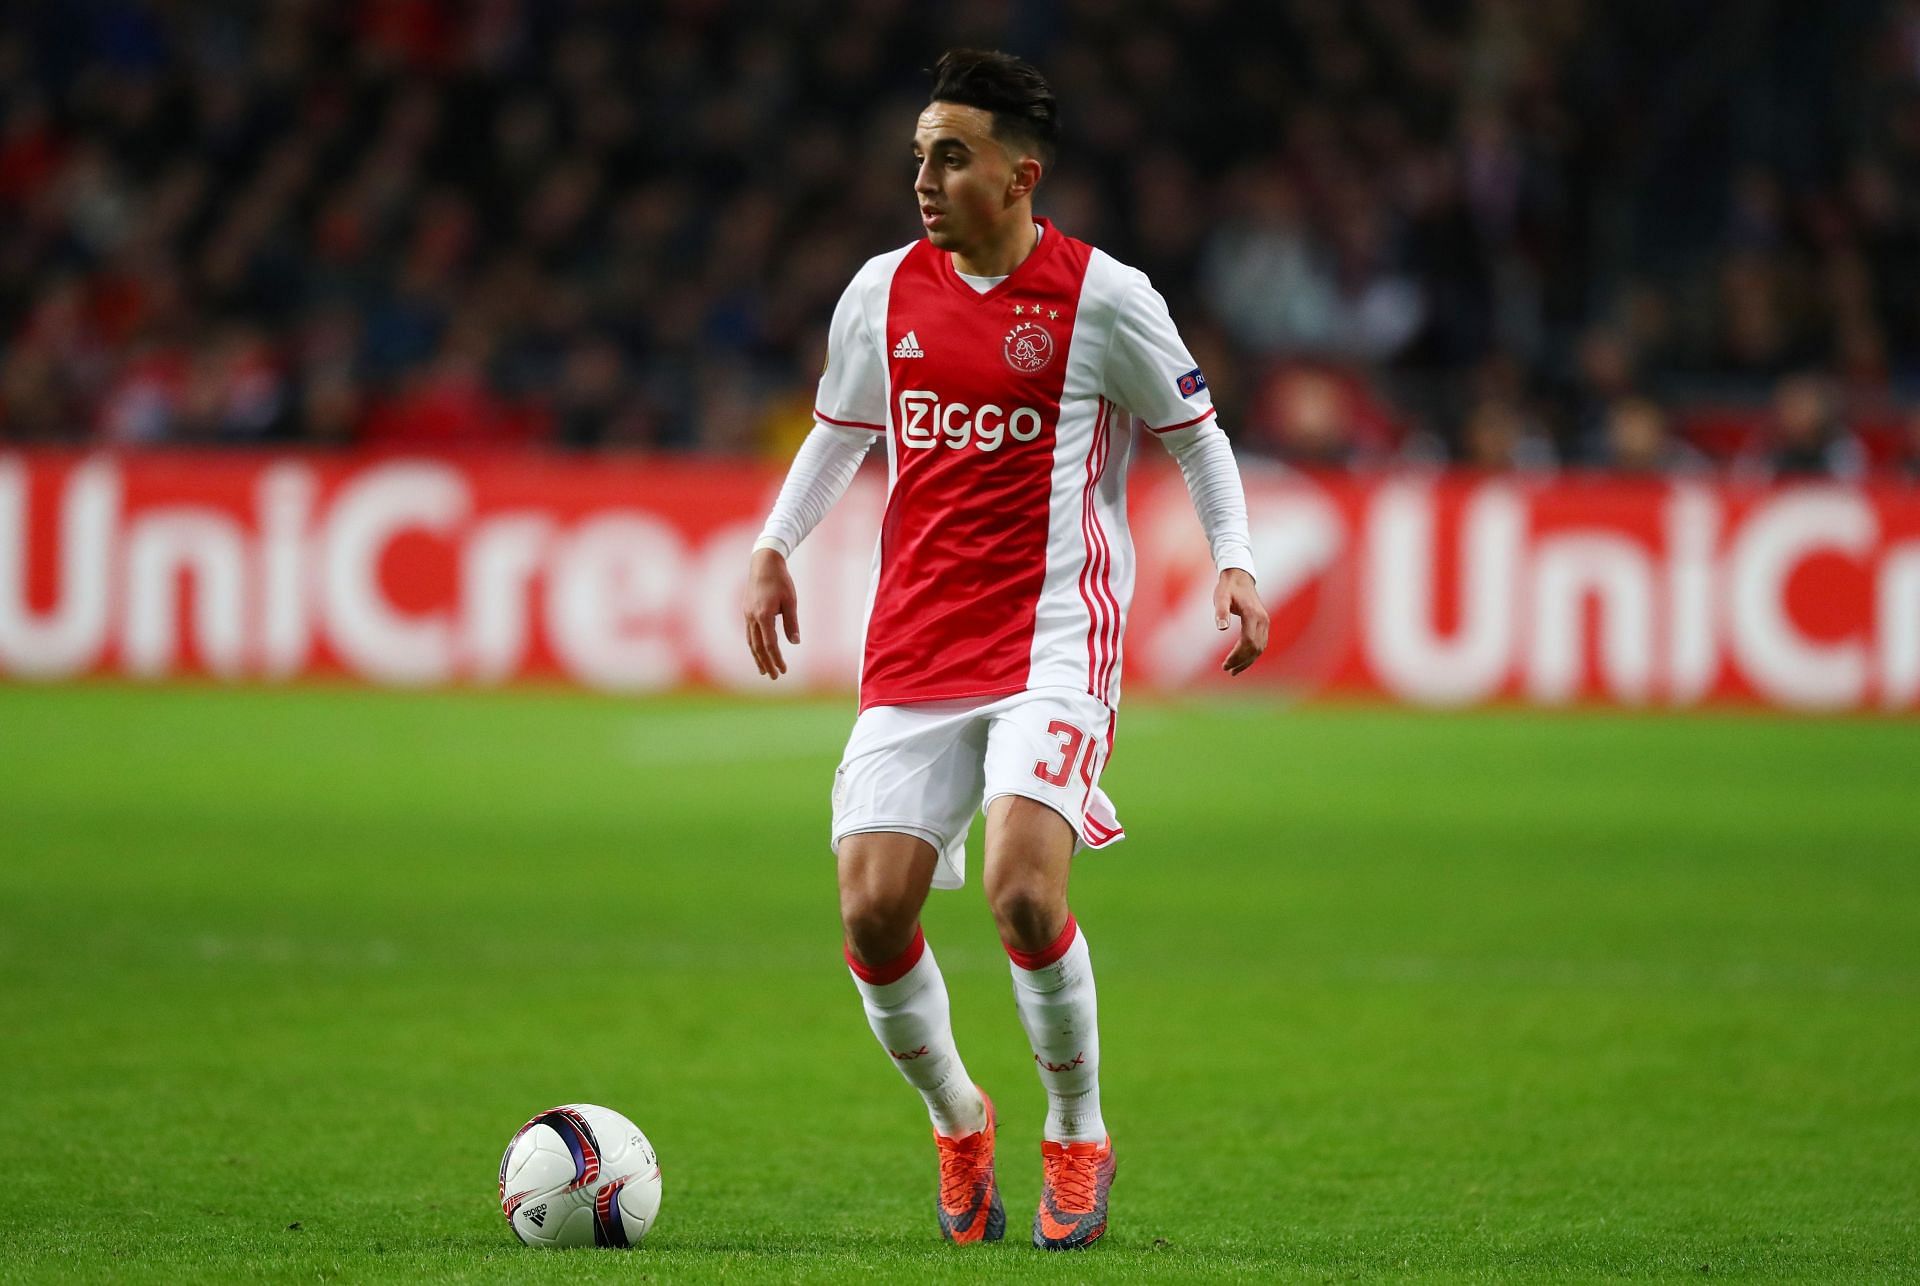 Abdelhak Nouri woke up from a coma after almost three years.